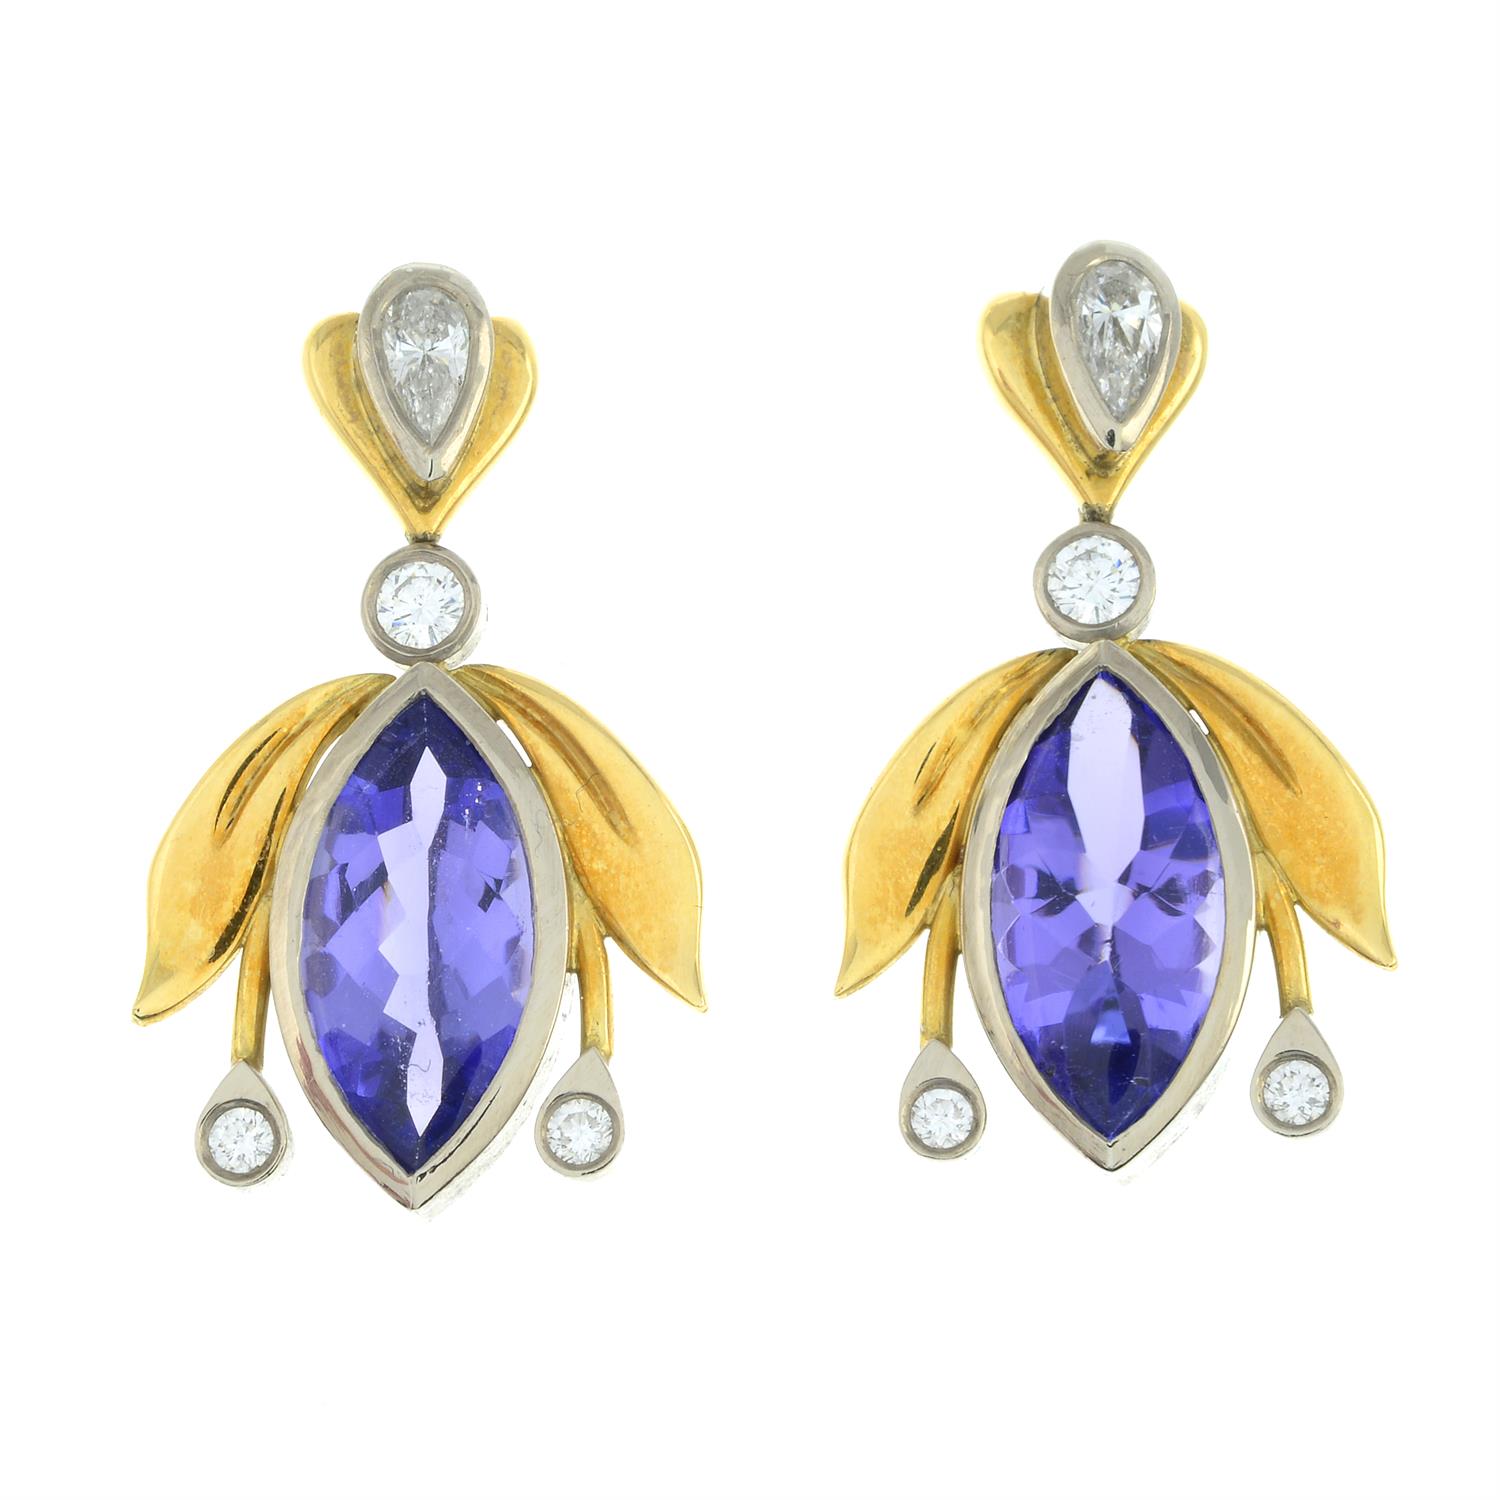 Tanzanite and diamond earrings, by Catherine Best - Image 2 of 4